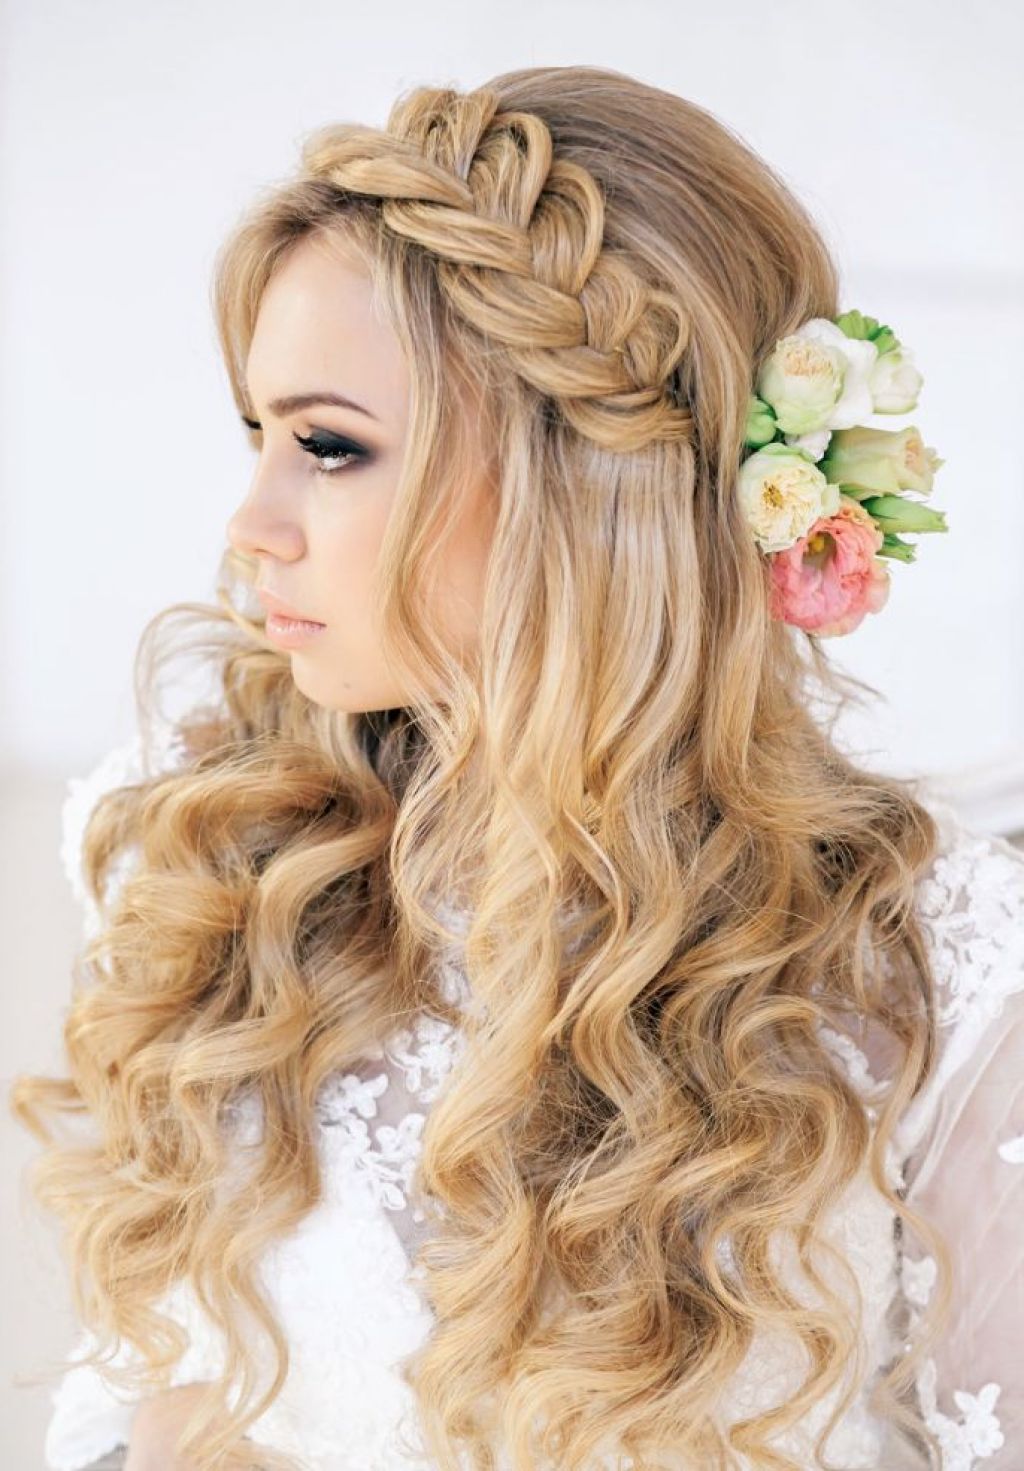 65 Prom Hairstyles That Complement Your Beauty - Fave ...